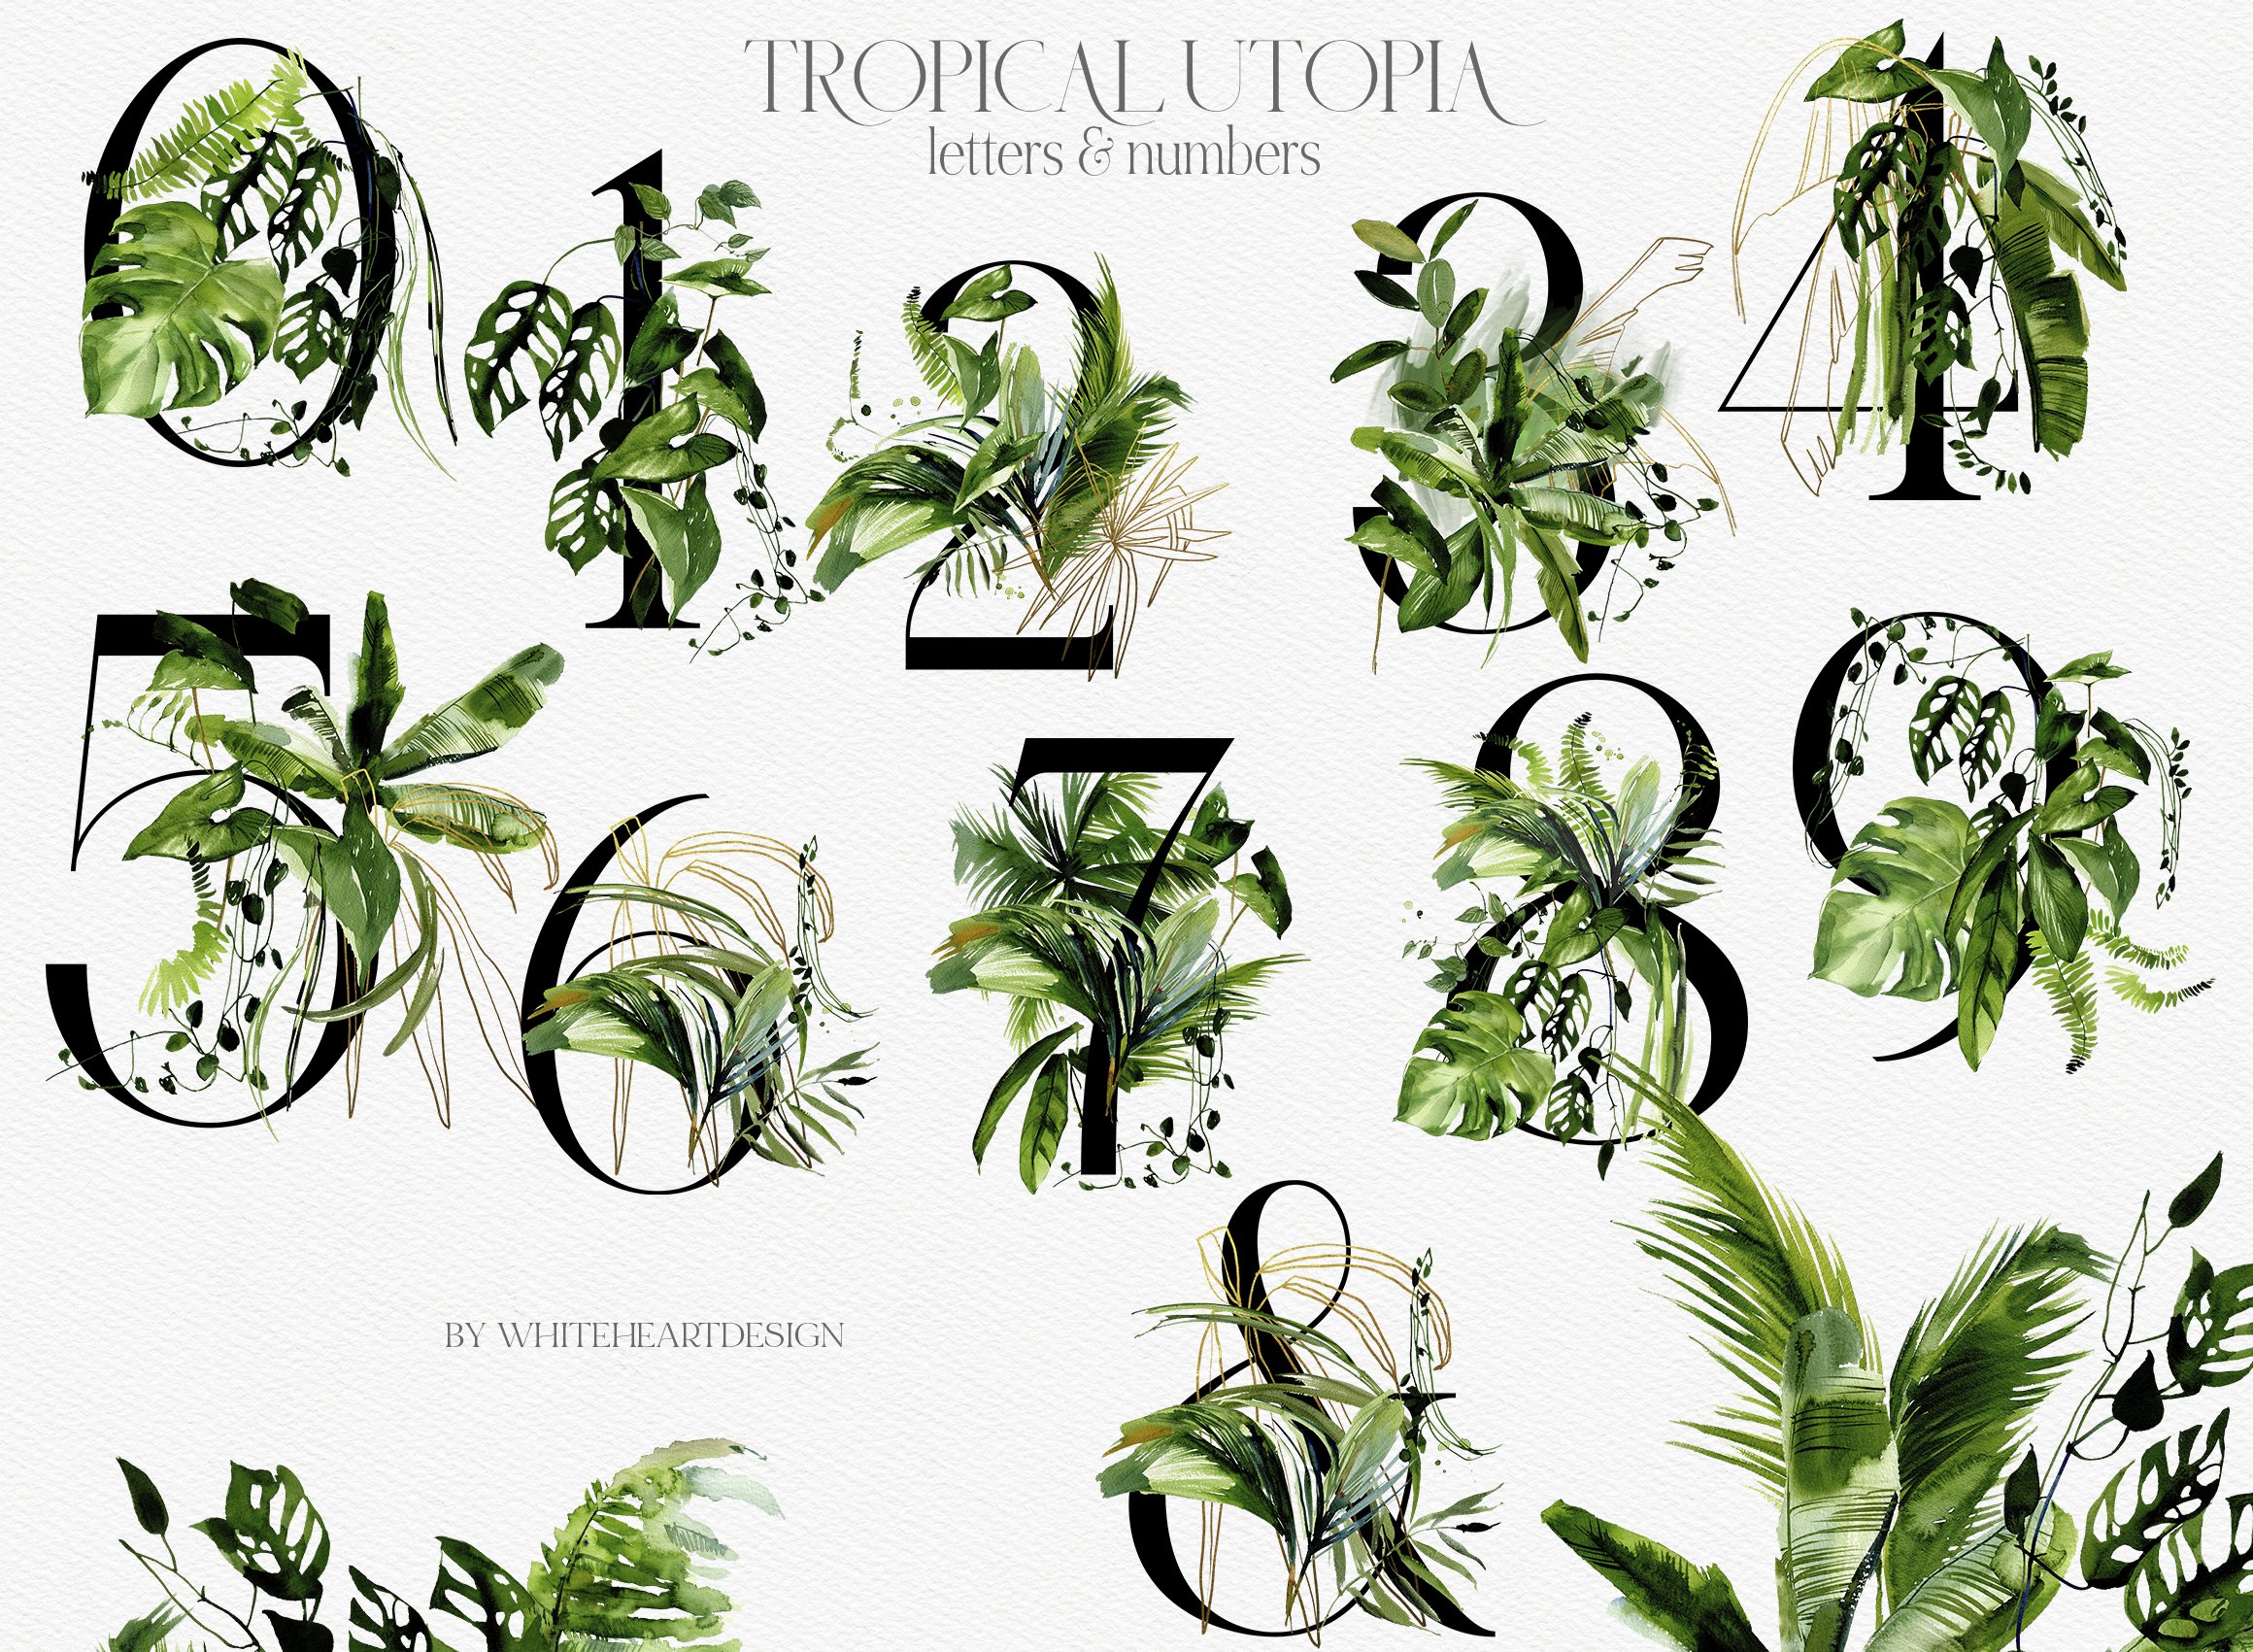 Set of numbers made up of tropical plants.